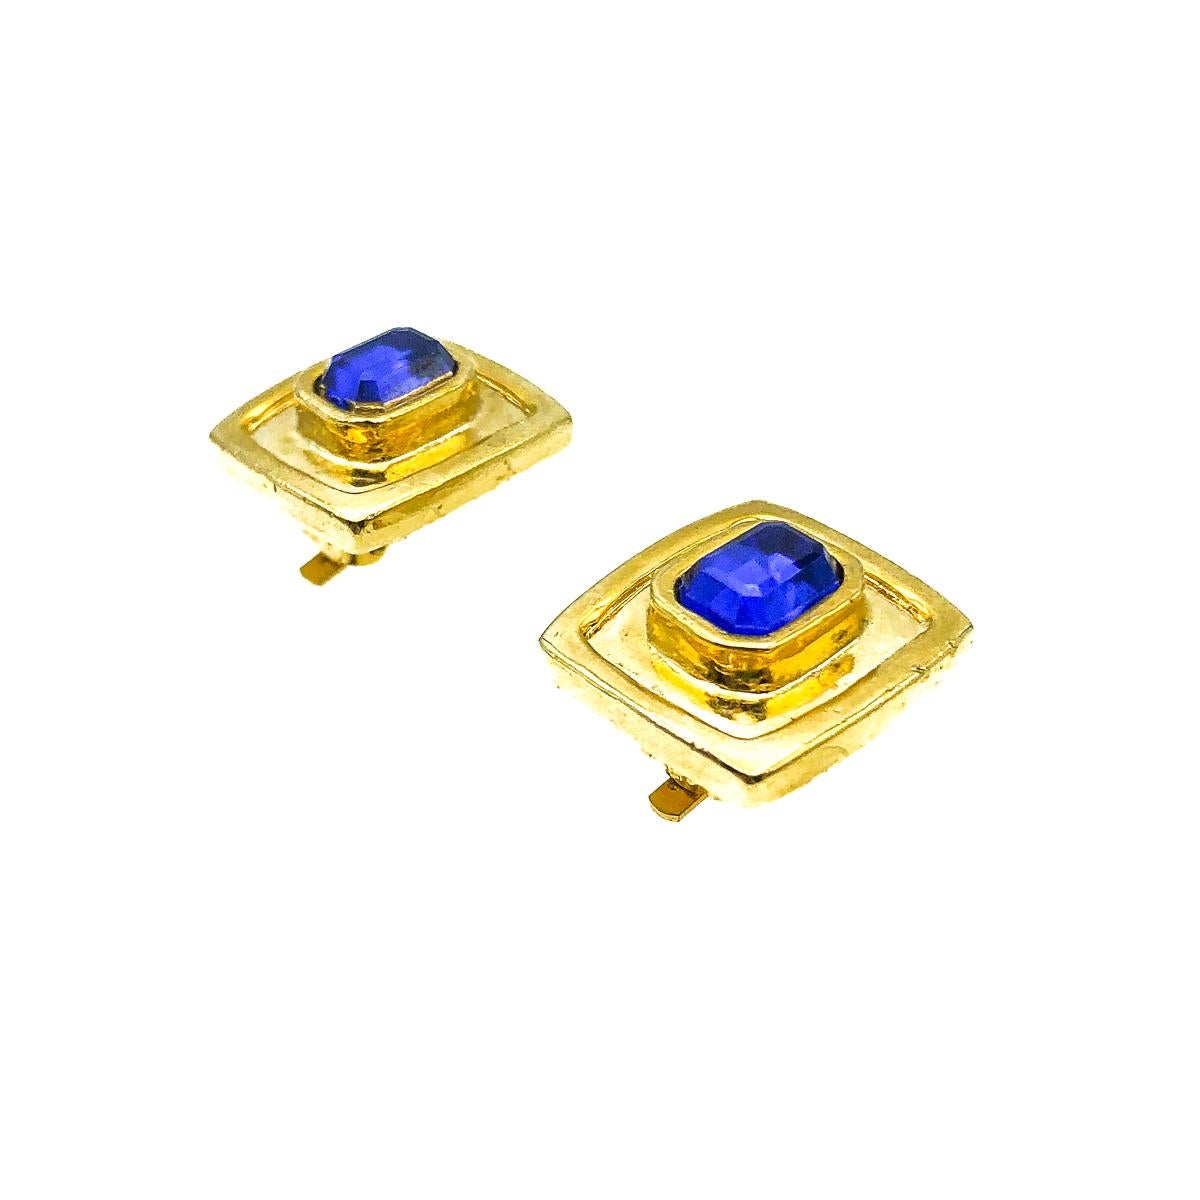 Vintage Blue Glass Earrings. Featuring very high quality, weighty geo style mounts set with a emerald cut style glass stone in glorous electric blue. Crafted in gold plated metal. In very good vintage condition, signed, 1.6cms. A very chic pair of